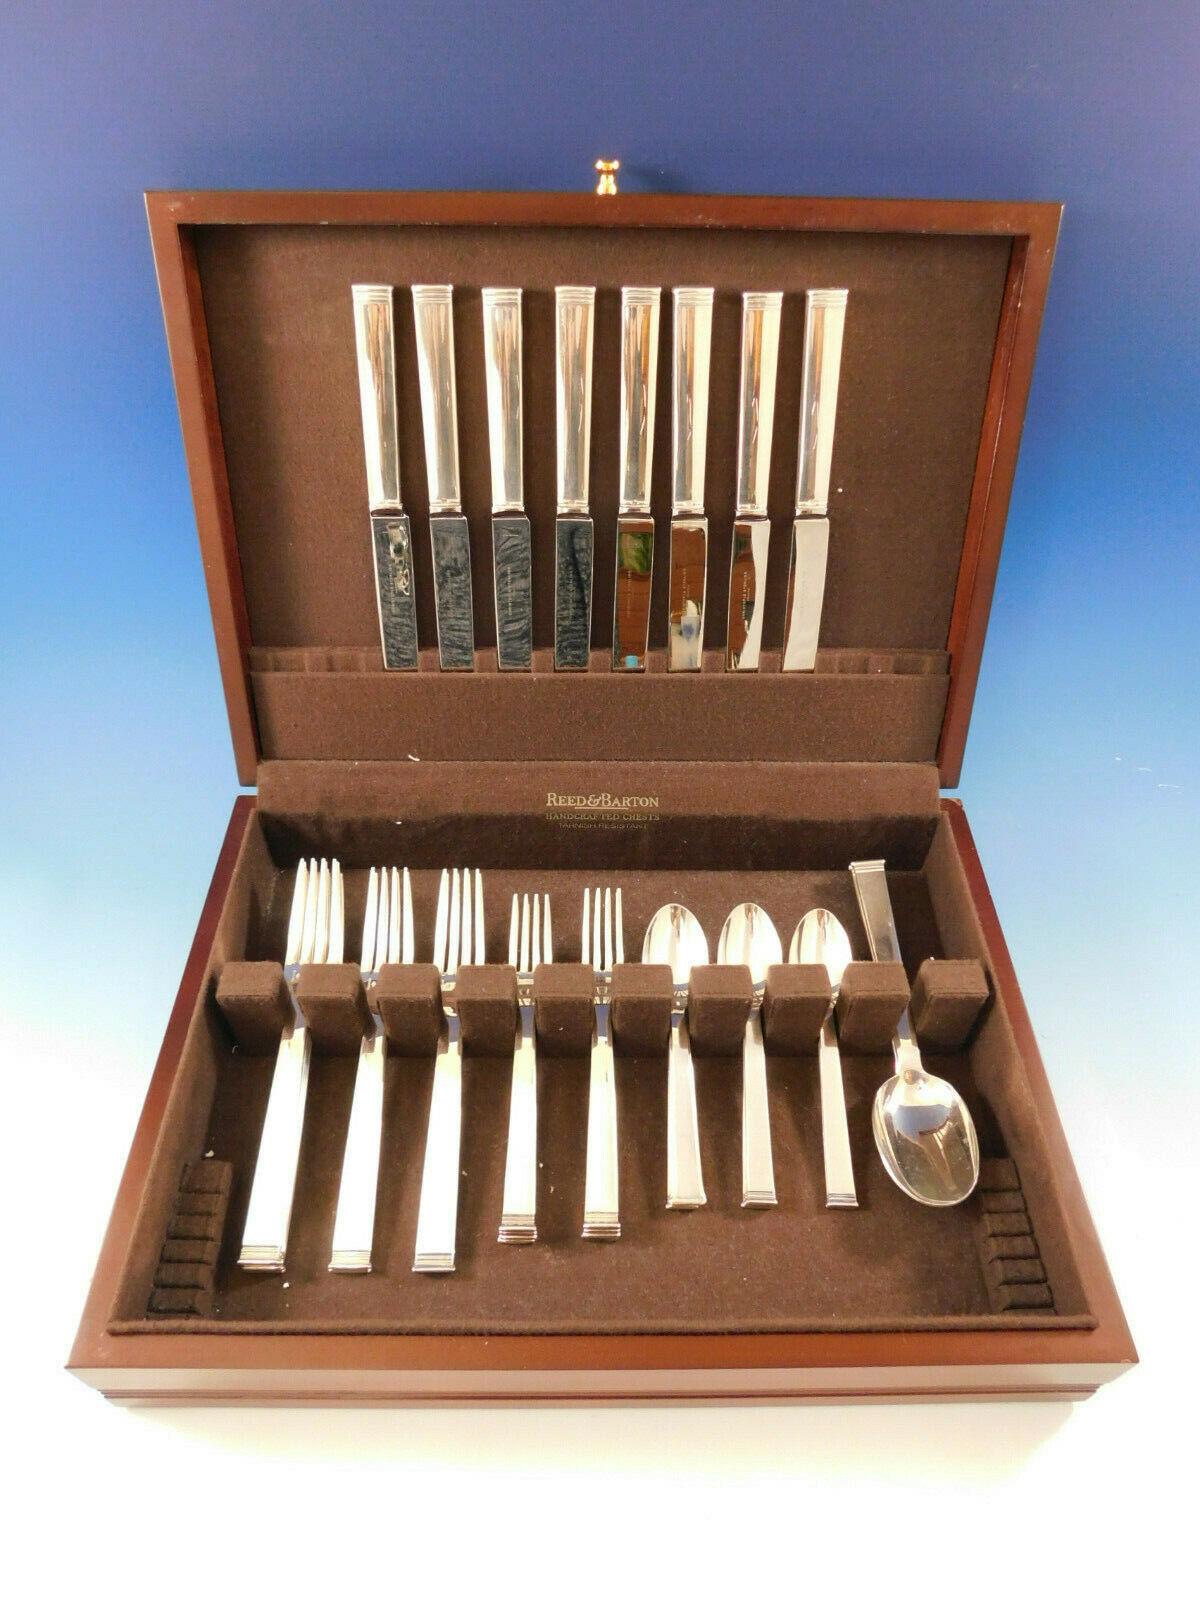 Superb dinner size commodore by Christofle French sterling silver flatware set - 34 pieces. This set includes:

8 dinner knives, 10 1/4